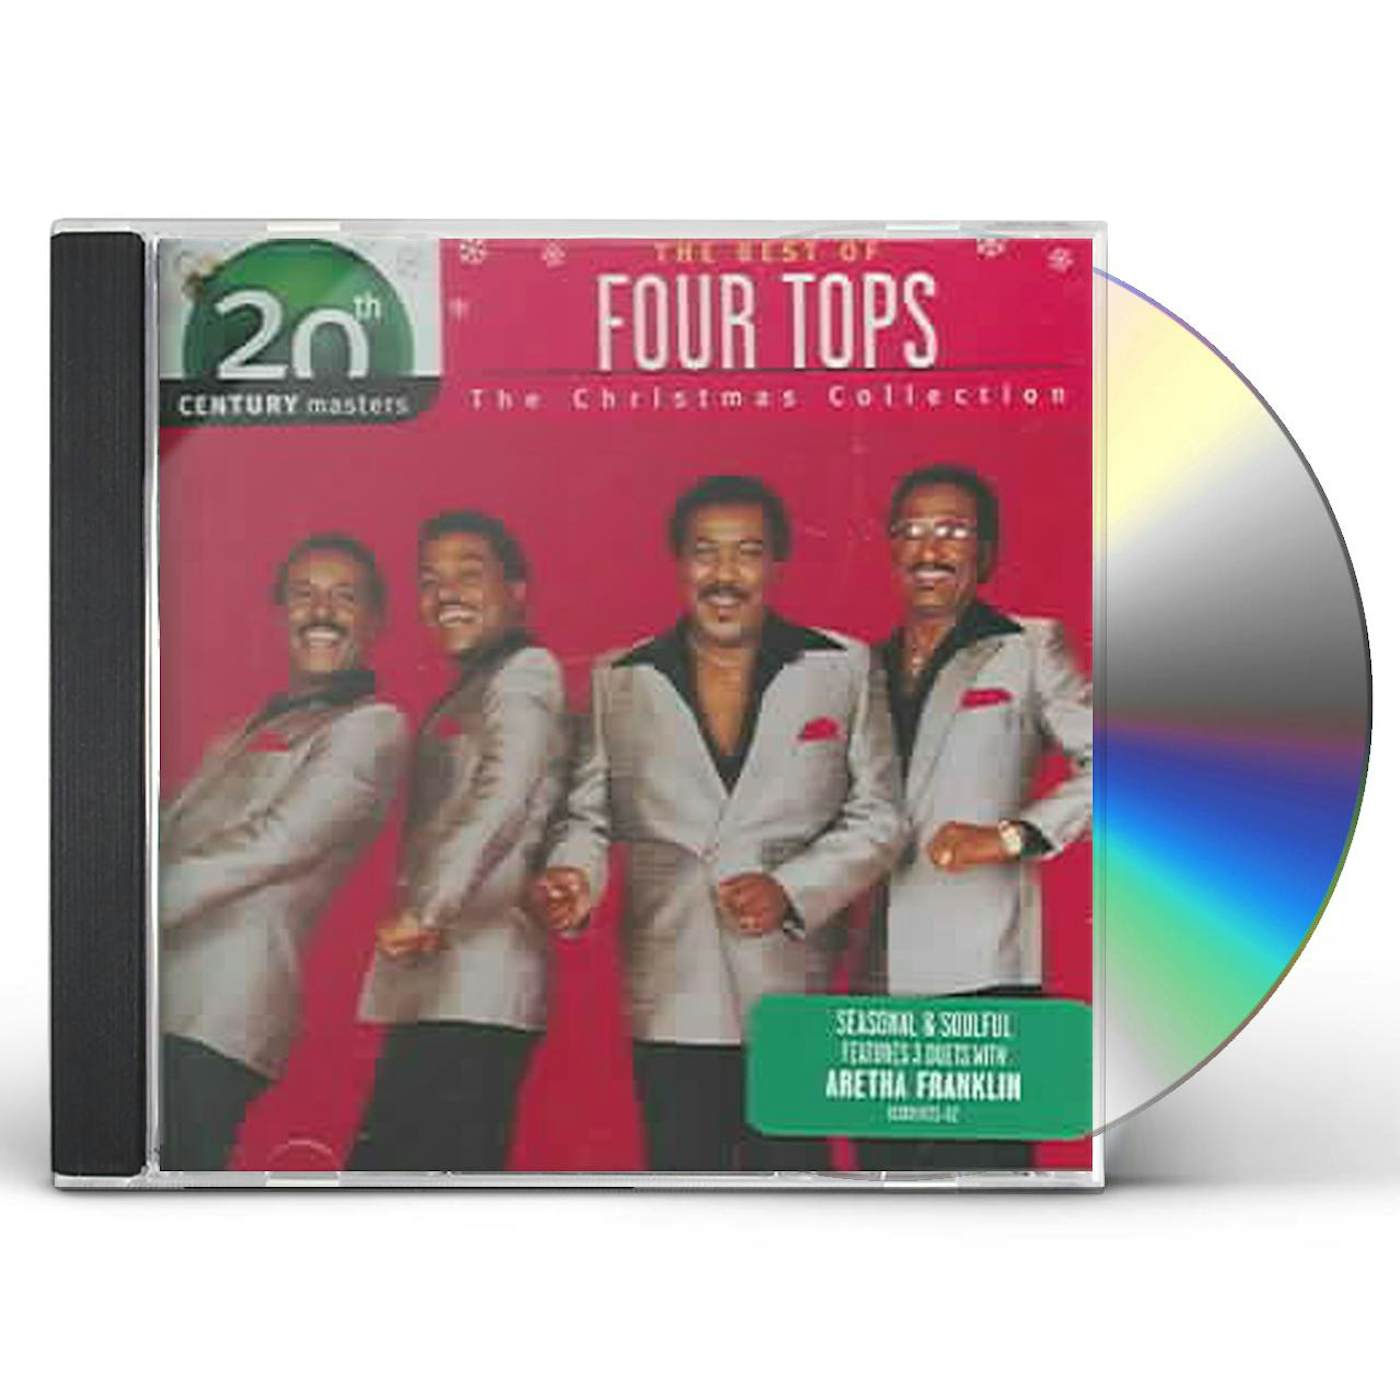 Four Tops CHRISTMAS COLLECTION: 20TH CENTURY MASTERS CD